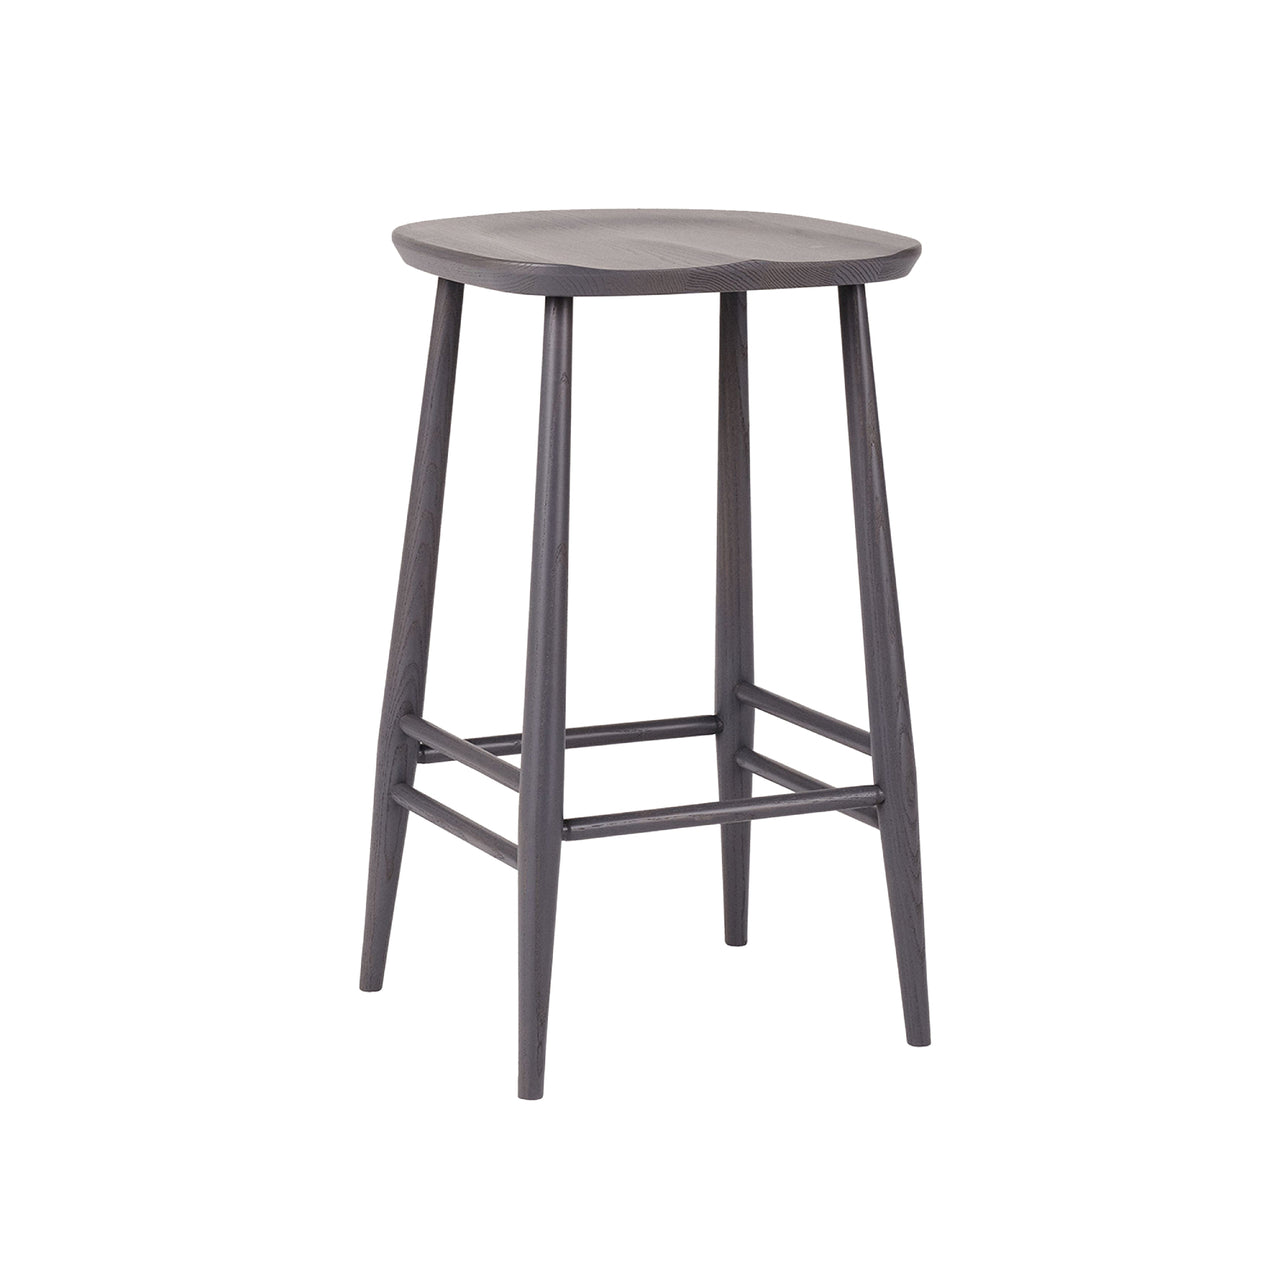 Originals Utility Bar + Counter Stool: Counter + Stained Warm Grey